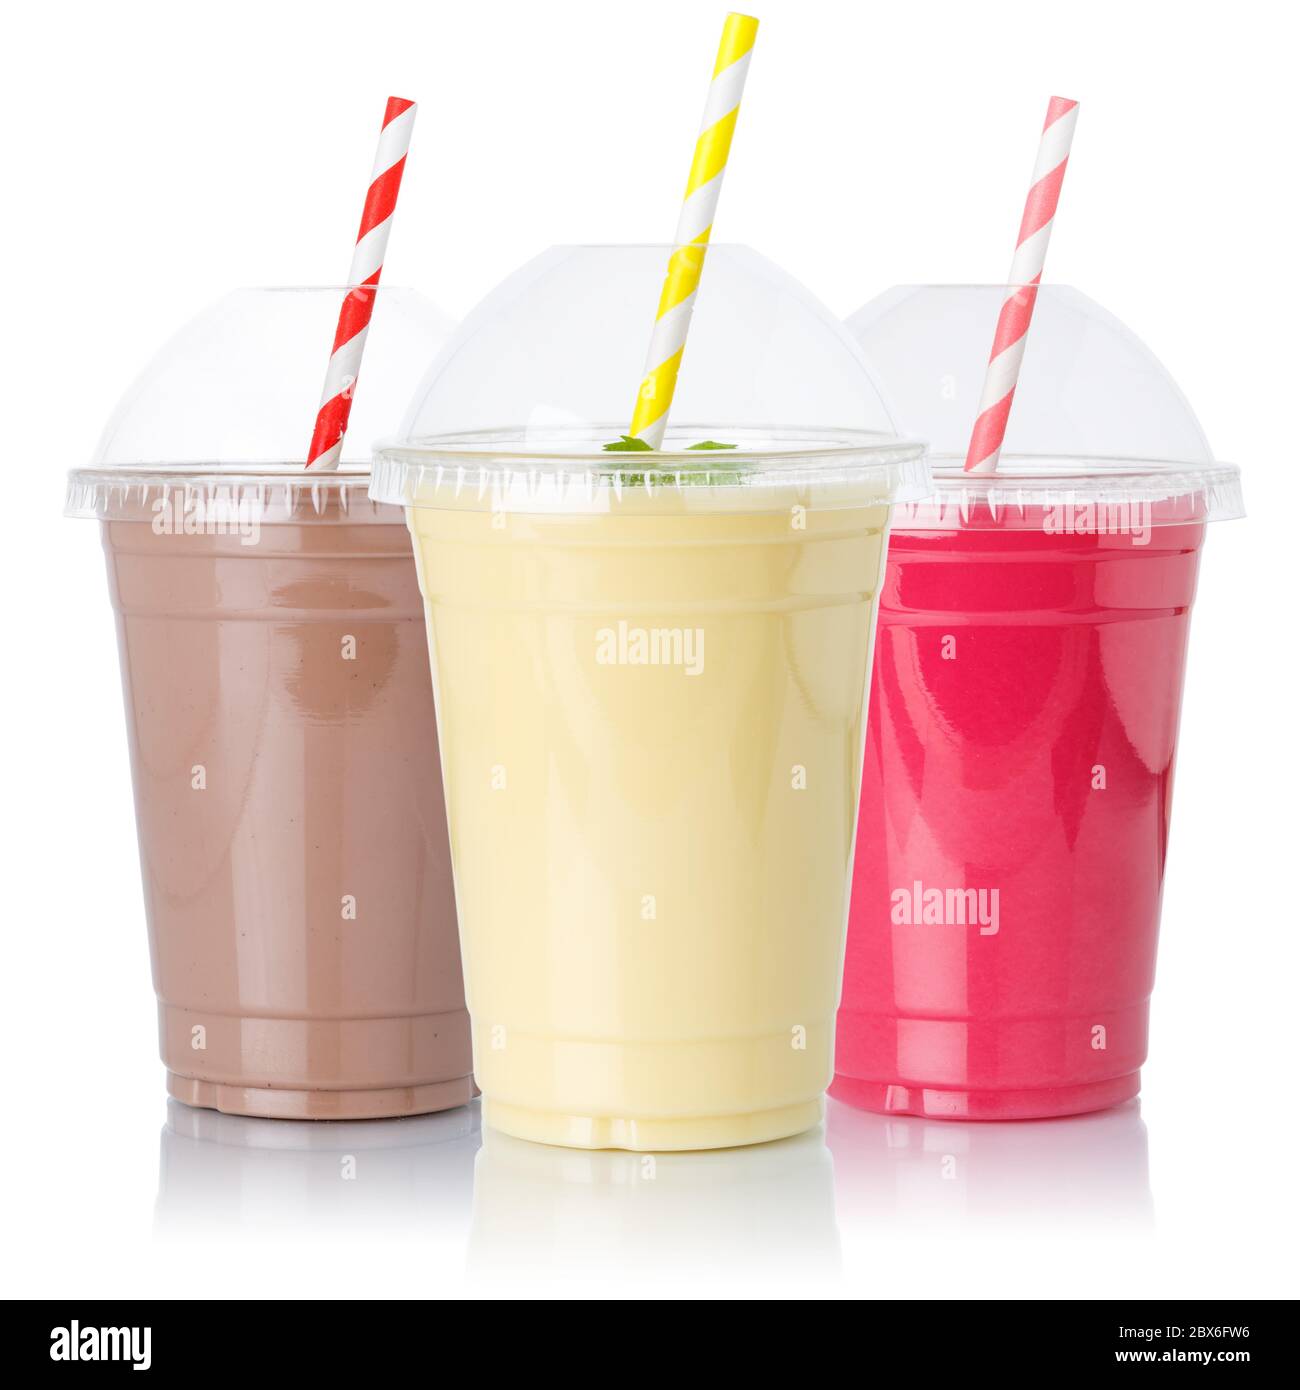 https://c8.alamy.com/comp/2BX6FW6/chocolate-vanilla-strawberry-milk-shake-milkshake-collection-straw-in-a-cup-isolated-on-a-white-background-2BX6FW6.jpg